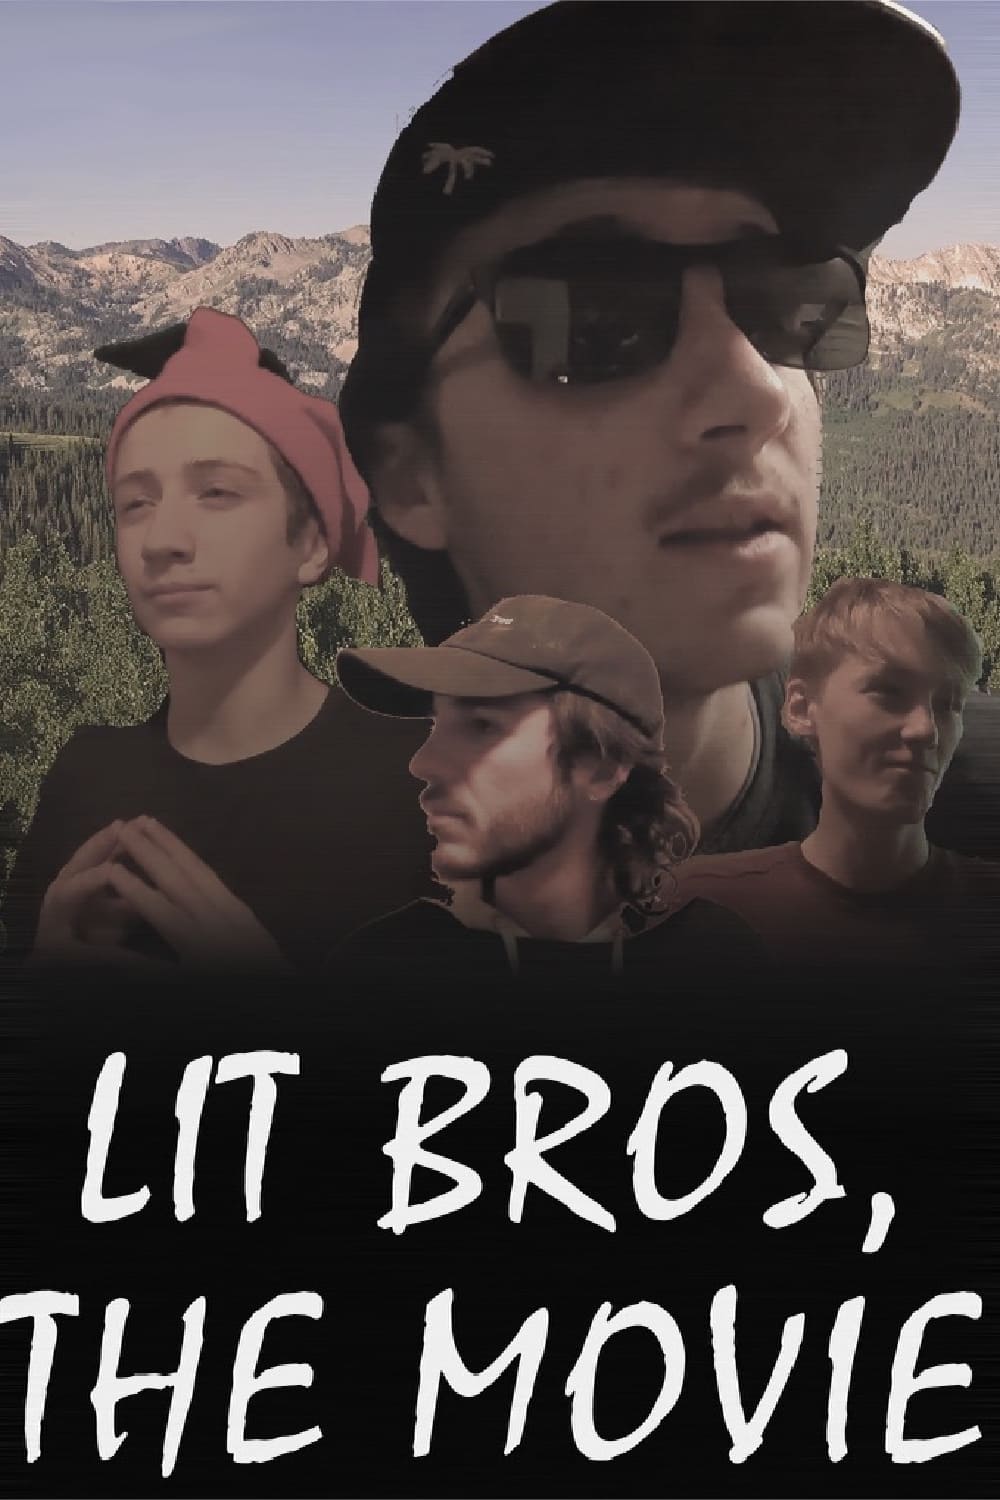 They're Lit, But Are They Bros?